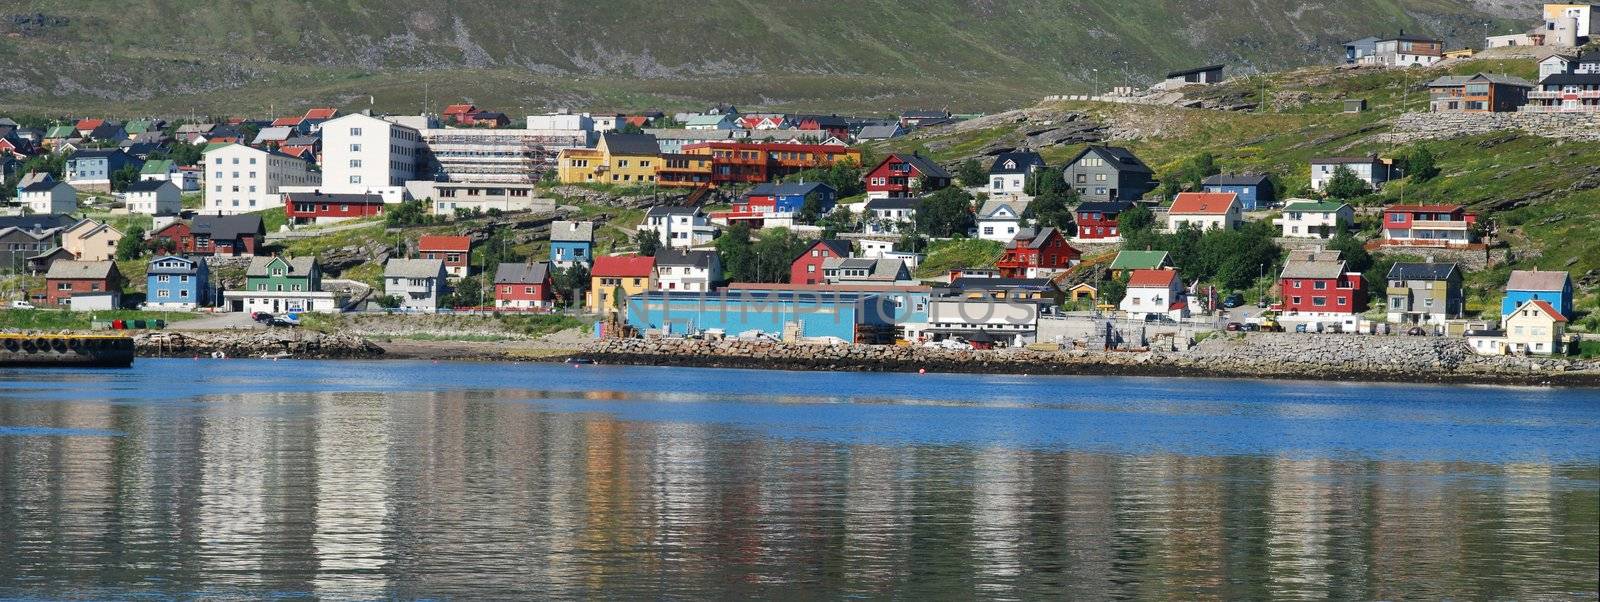 Its a cityscape of Hammerfest, claimed as a northernmost city in the world, the top of city church is behind of houses colored with different colours of Finnmark country and old vessel in the border of see